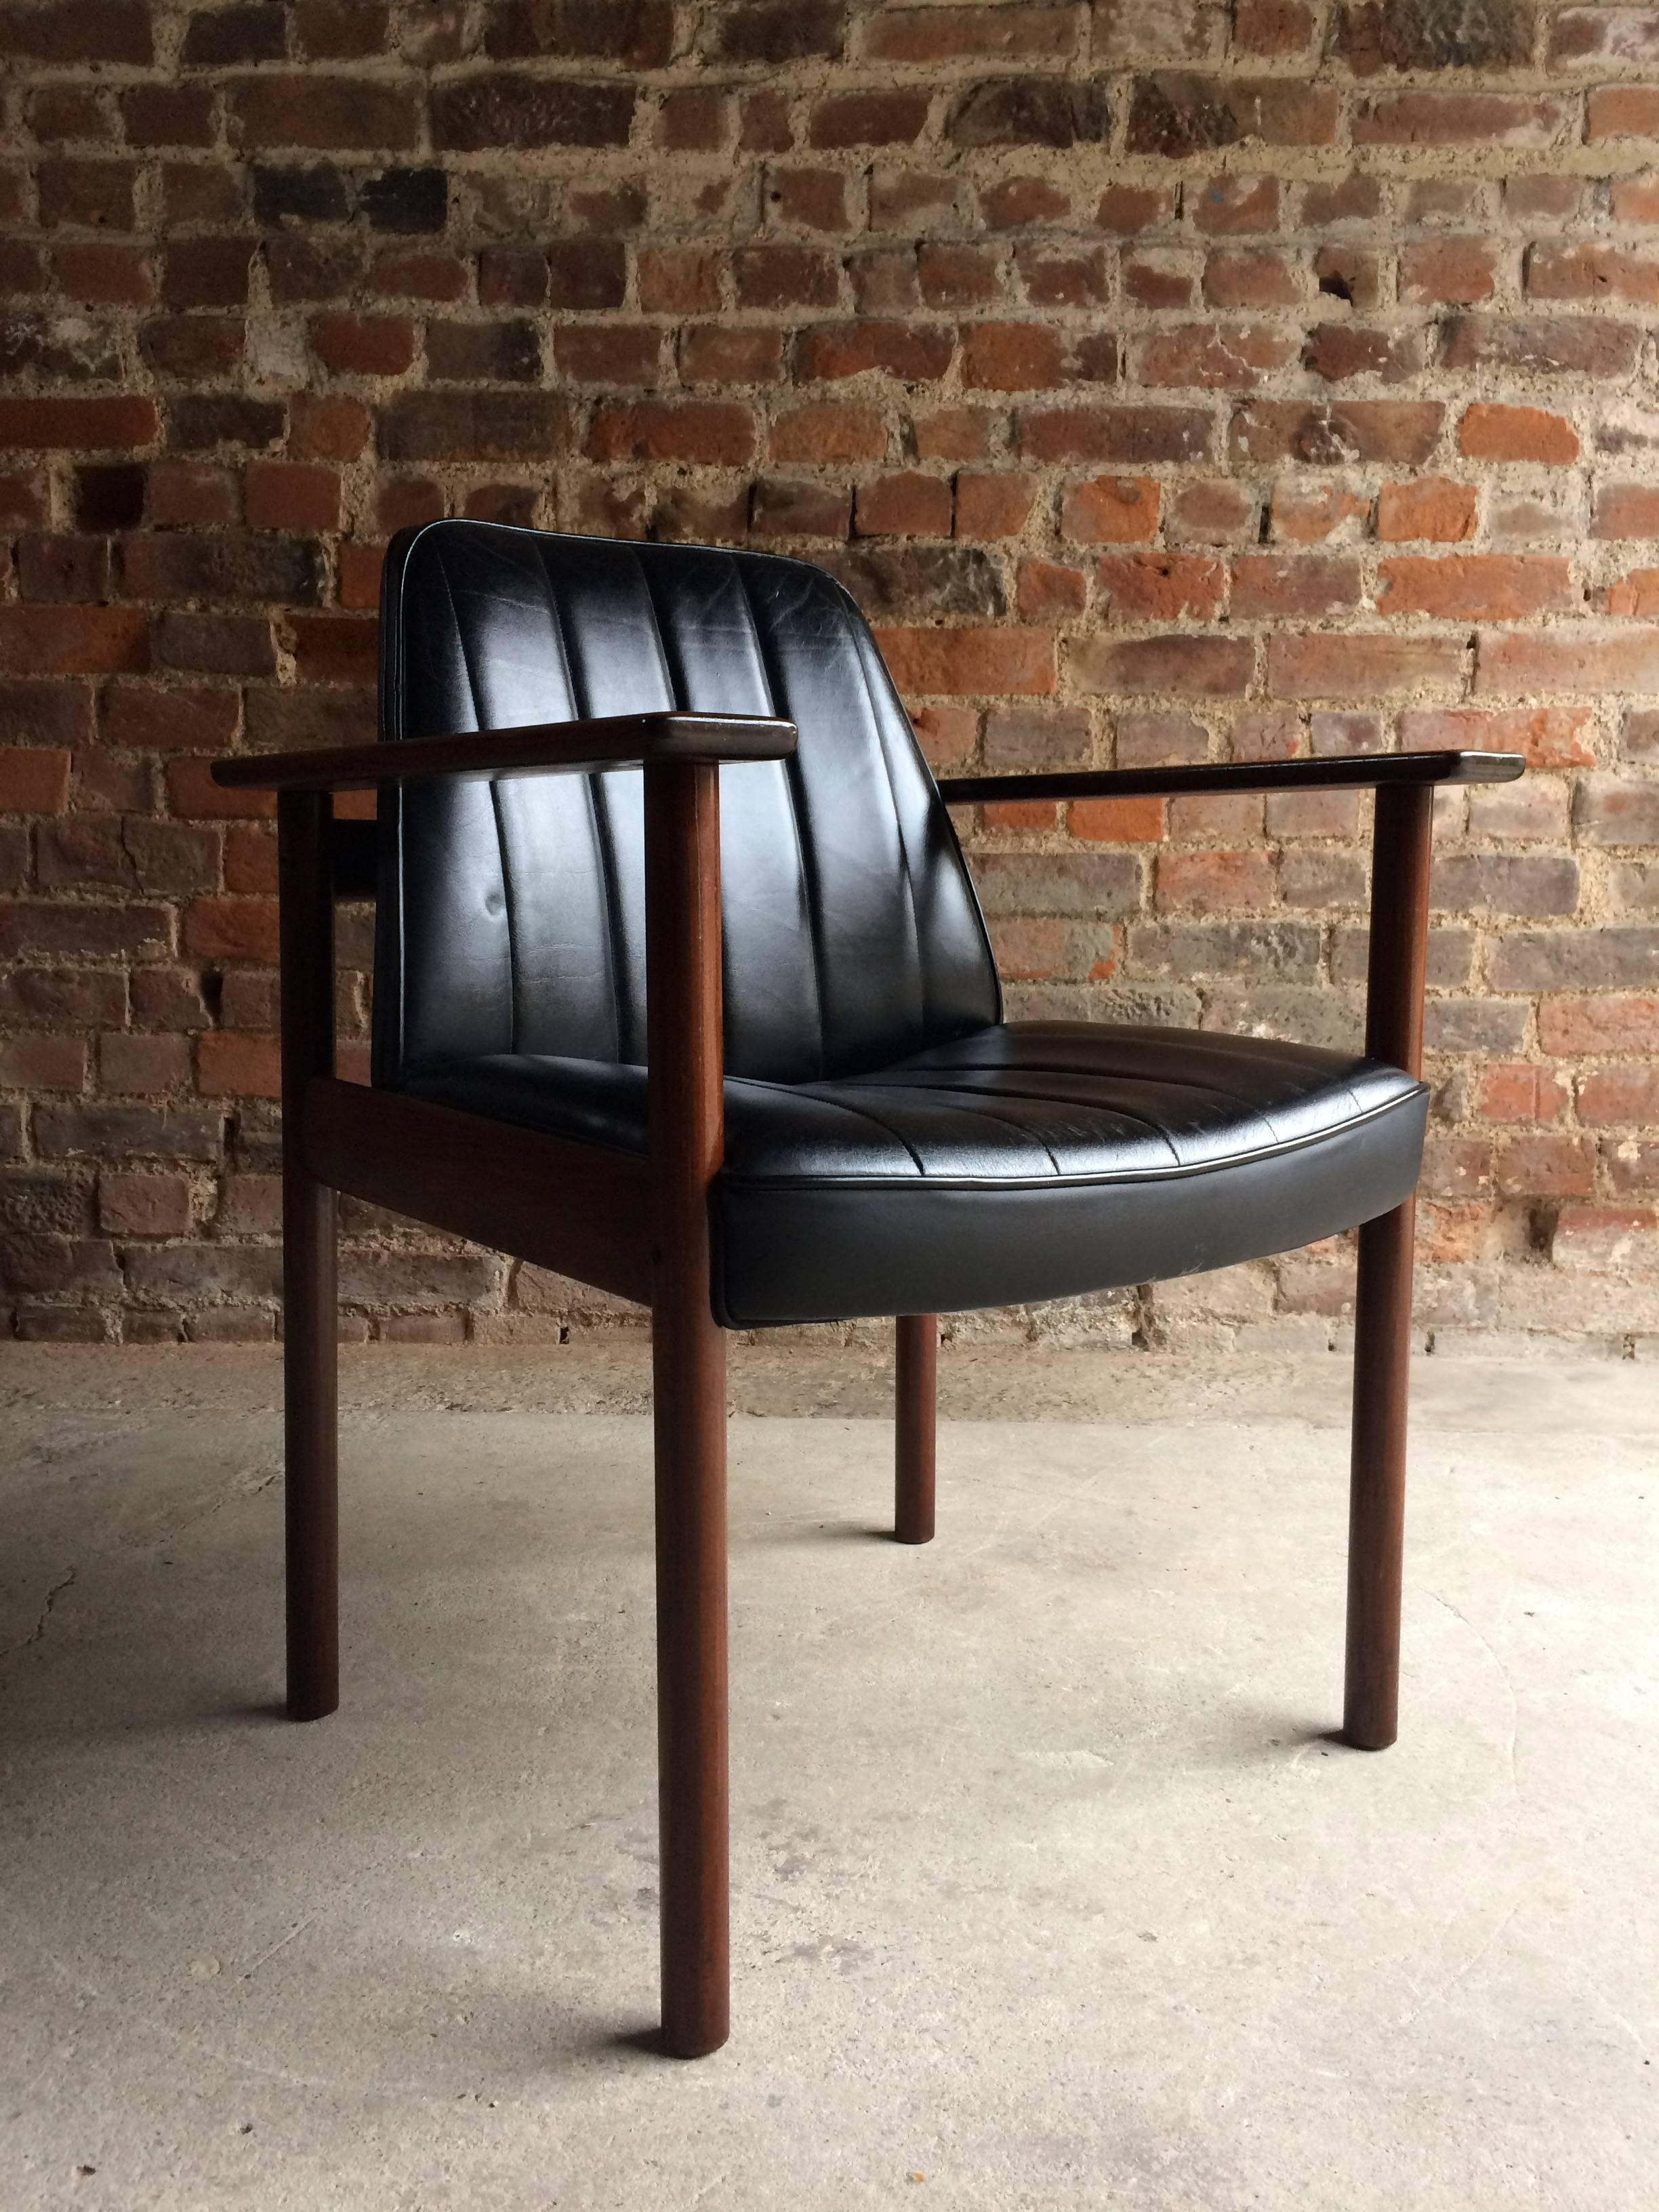 A rare chair by Norwegian design icon Sven Ivar Dysthe for Dokka Mobler solid rosewood armchair, circa 1960, the chair features a beautifully patinated black leather seat and a solid Rosewood frame, this chair is the rare version with solid rosewood